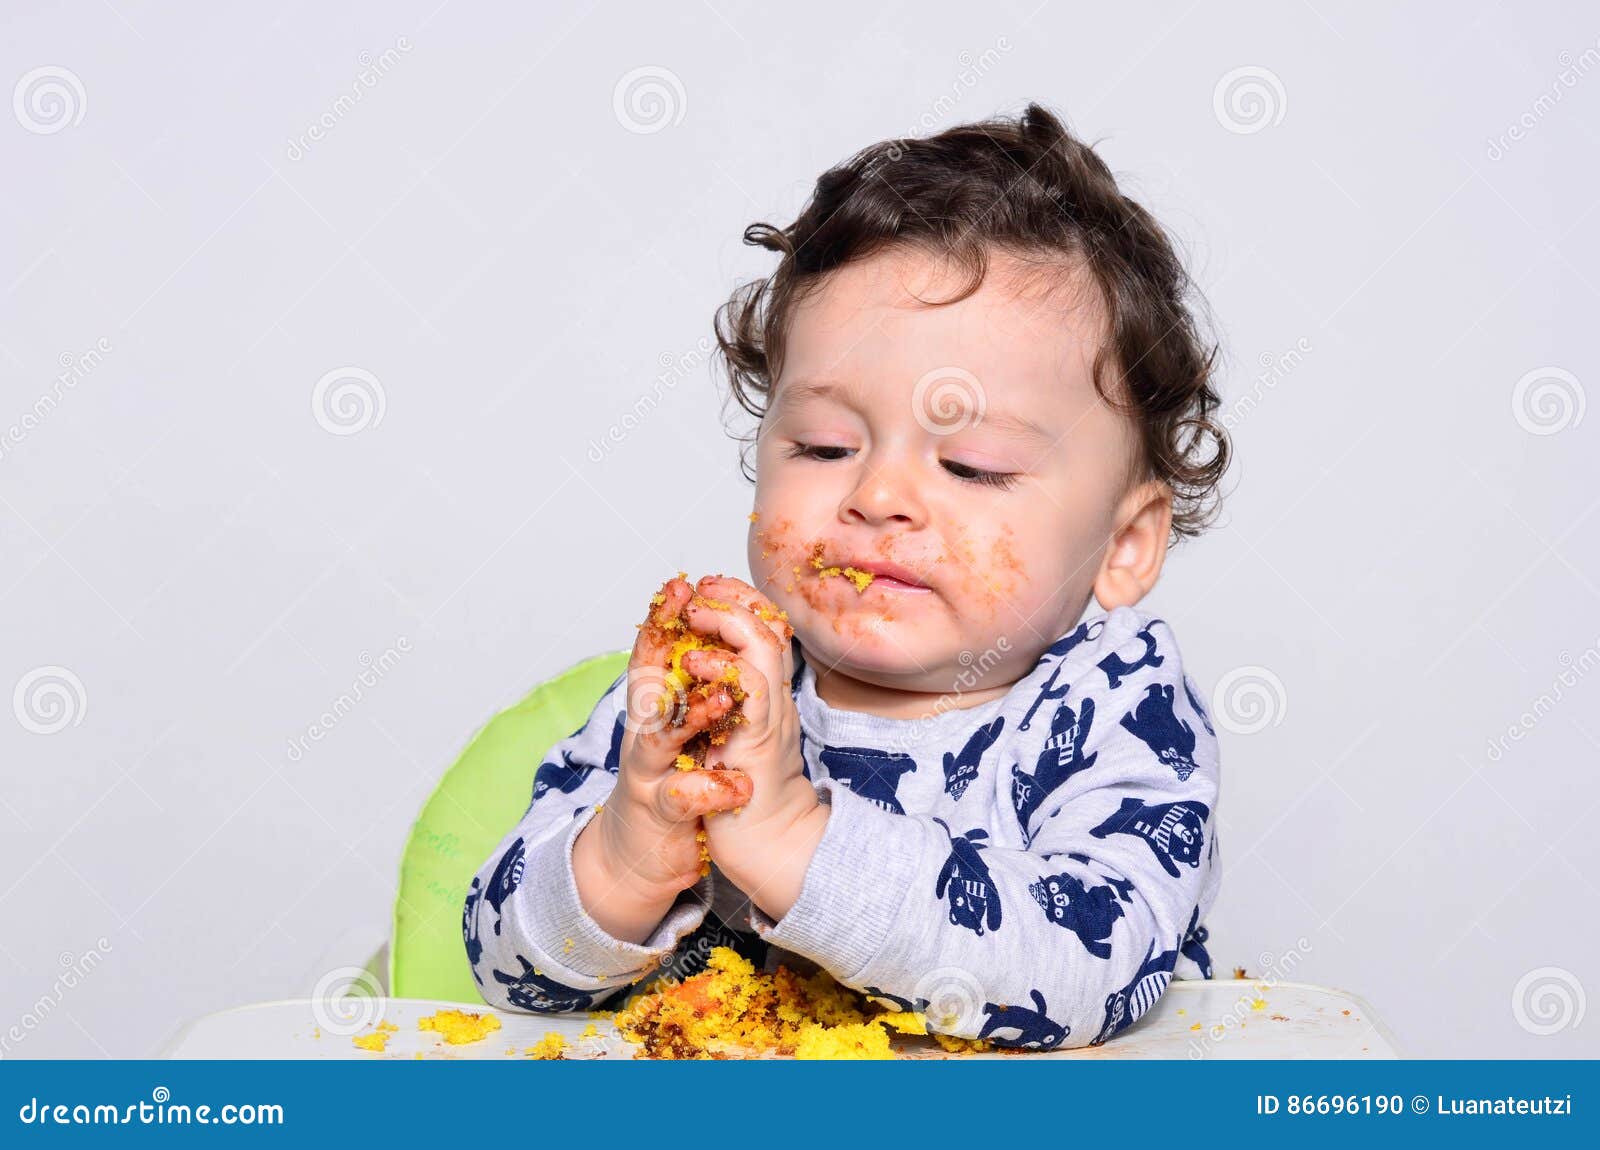 Portrait of a Cute Baby Eating Cake Making a Mess. Stock Photo - Image ...